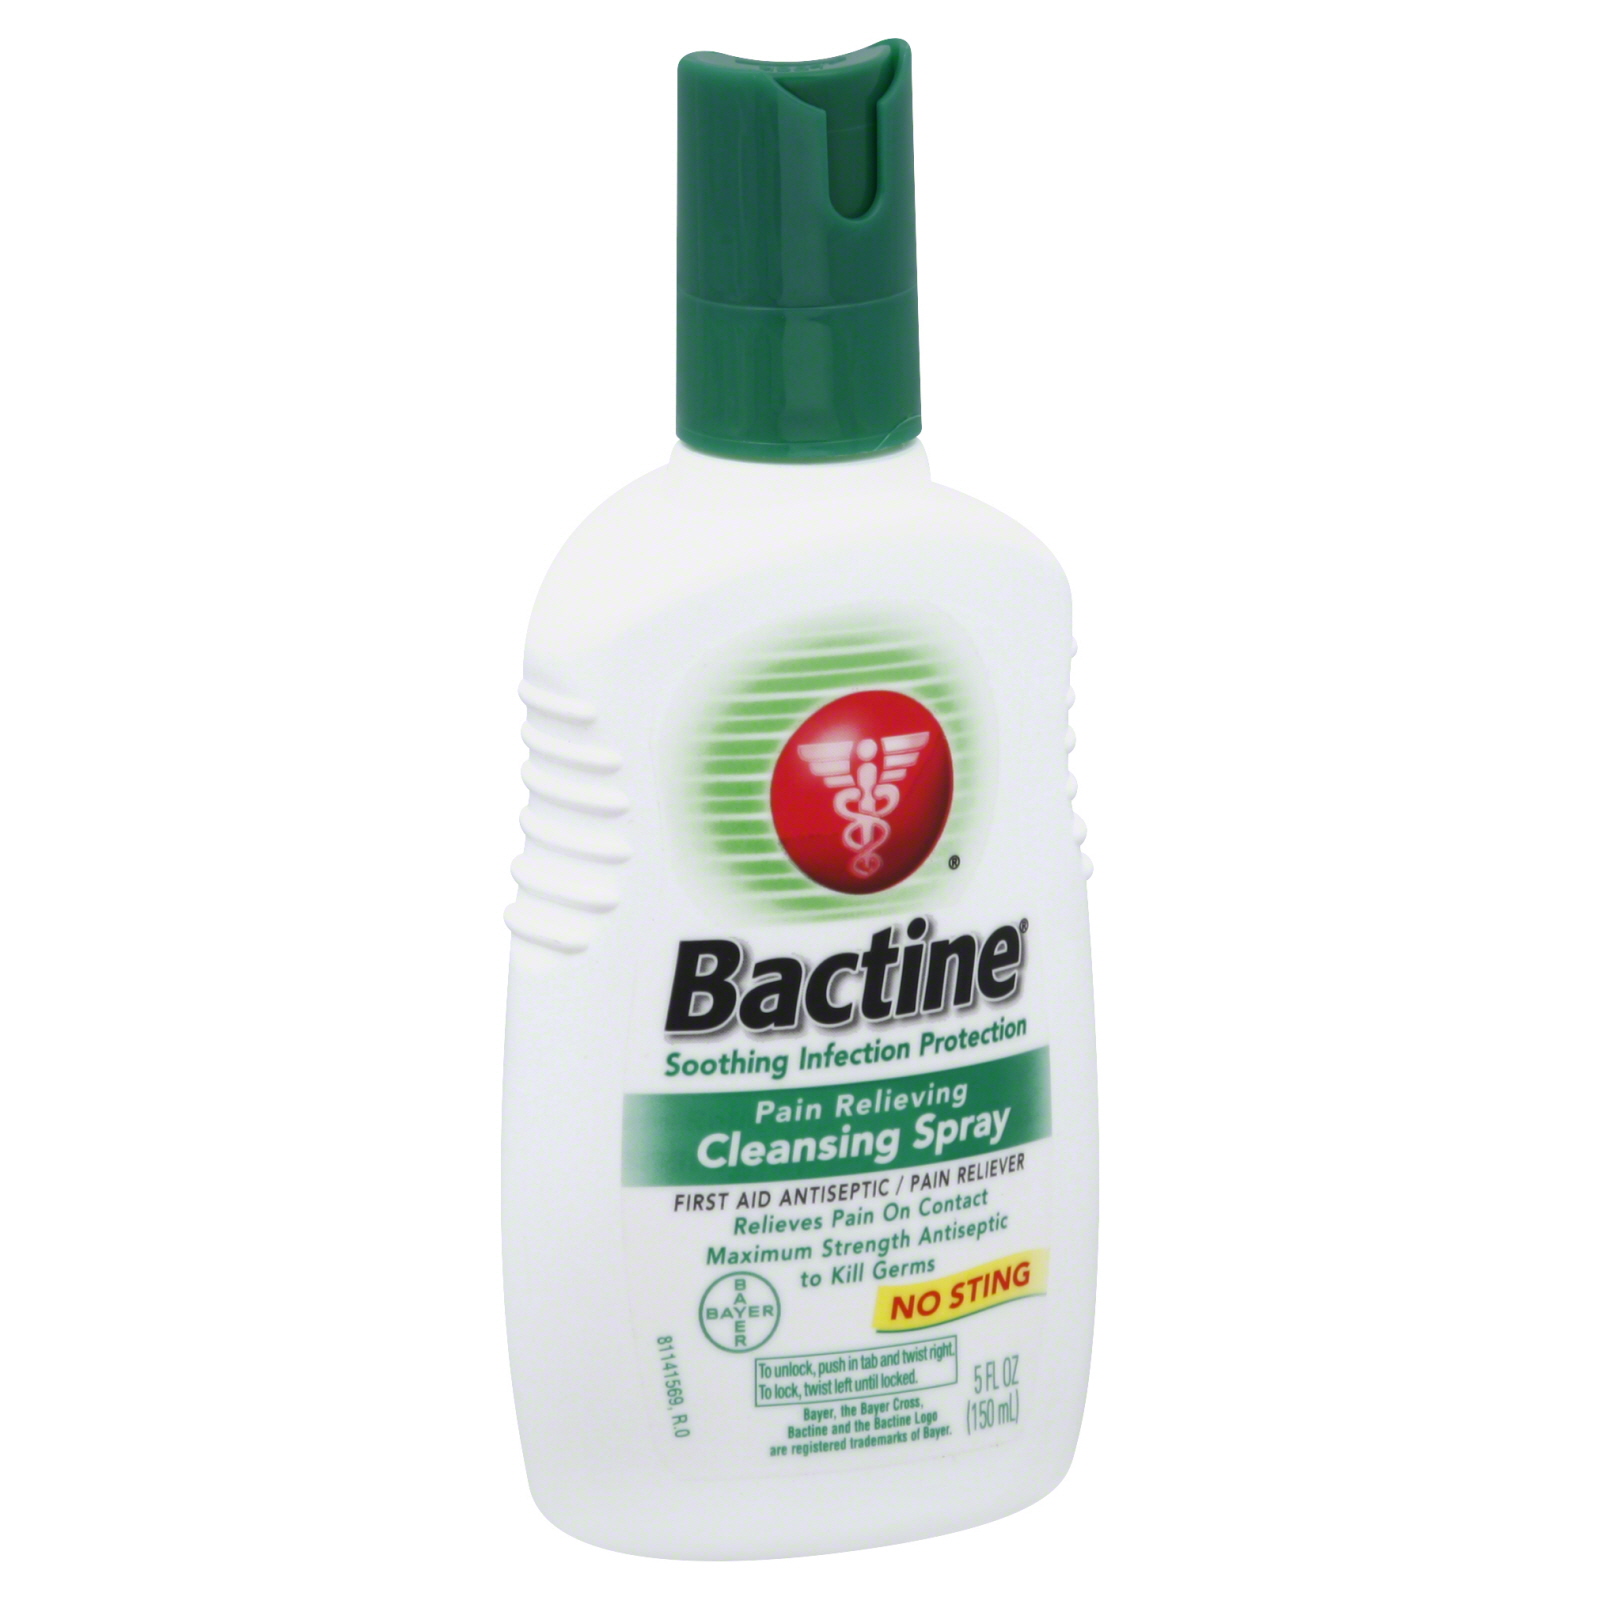 Bactine Cleansing Spray, Pain Relieving, 5 oz (150 ml)